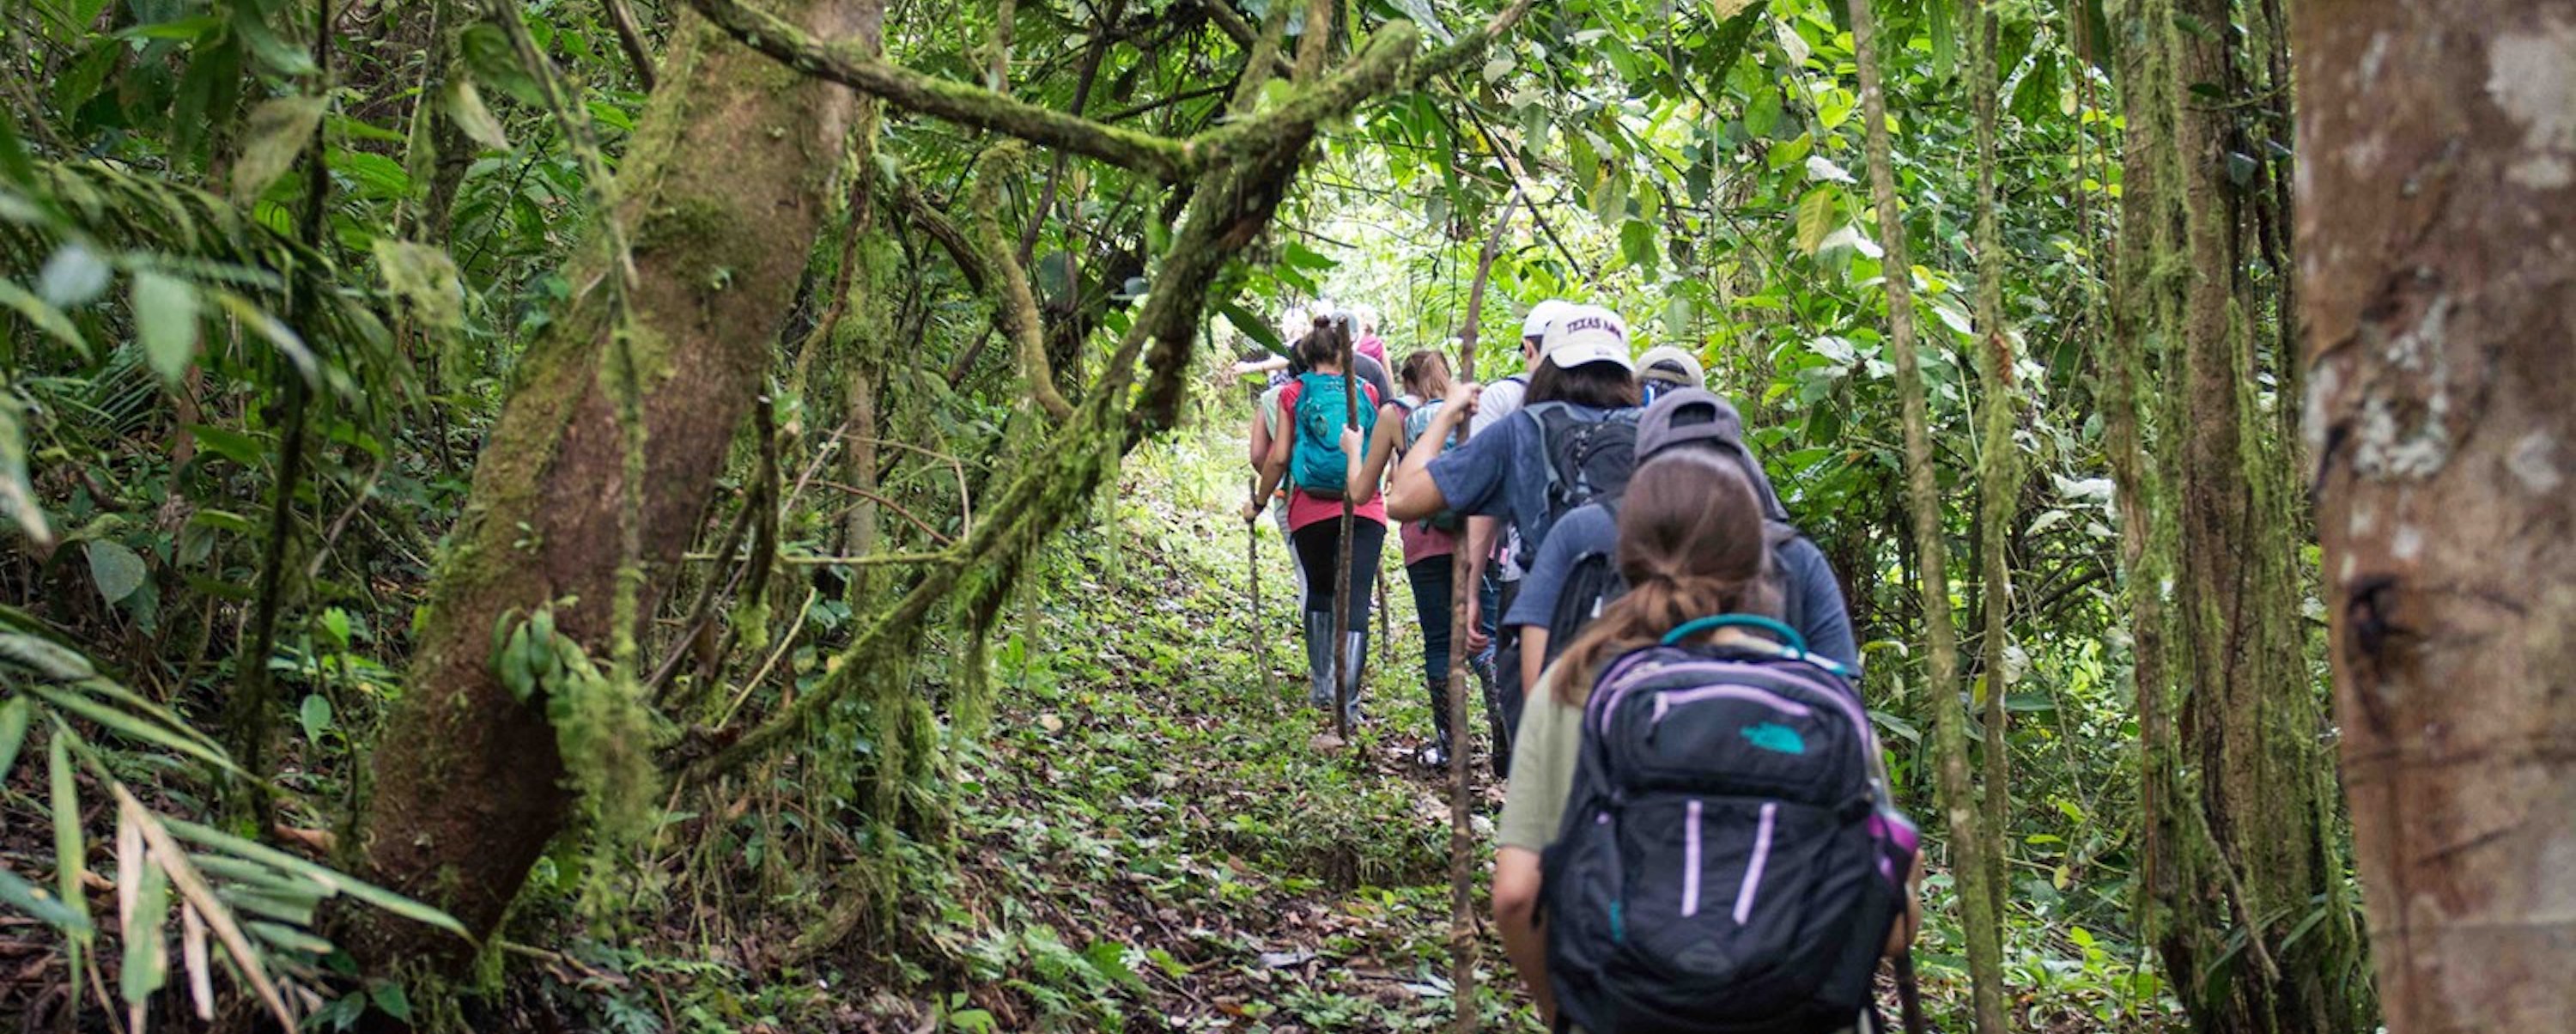 Students hiking in Costa Rica